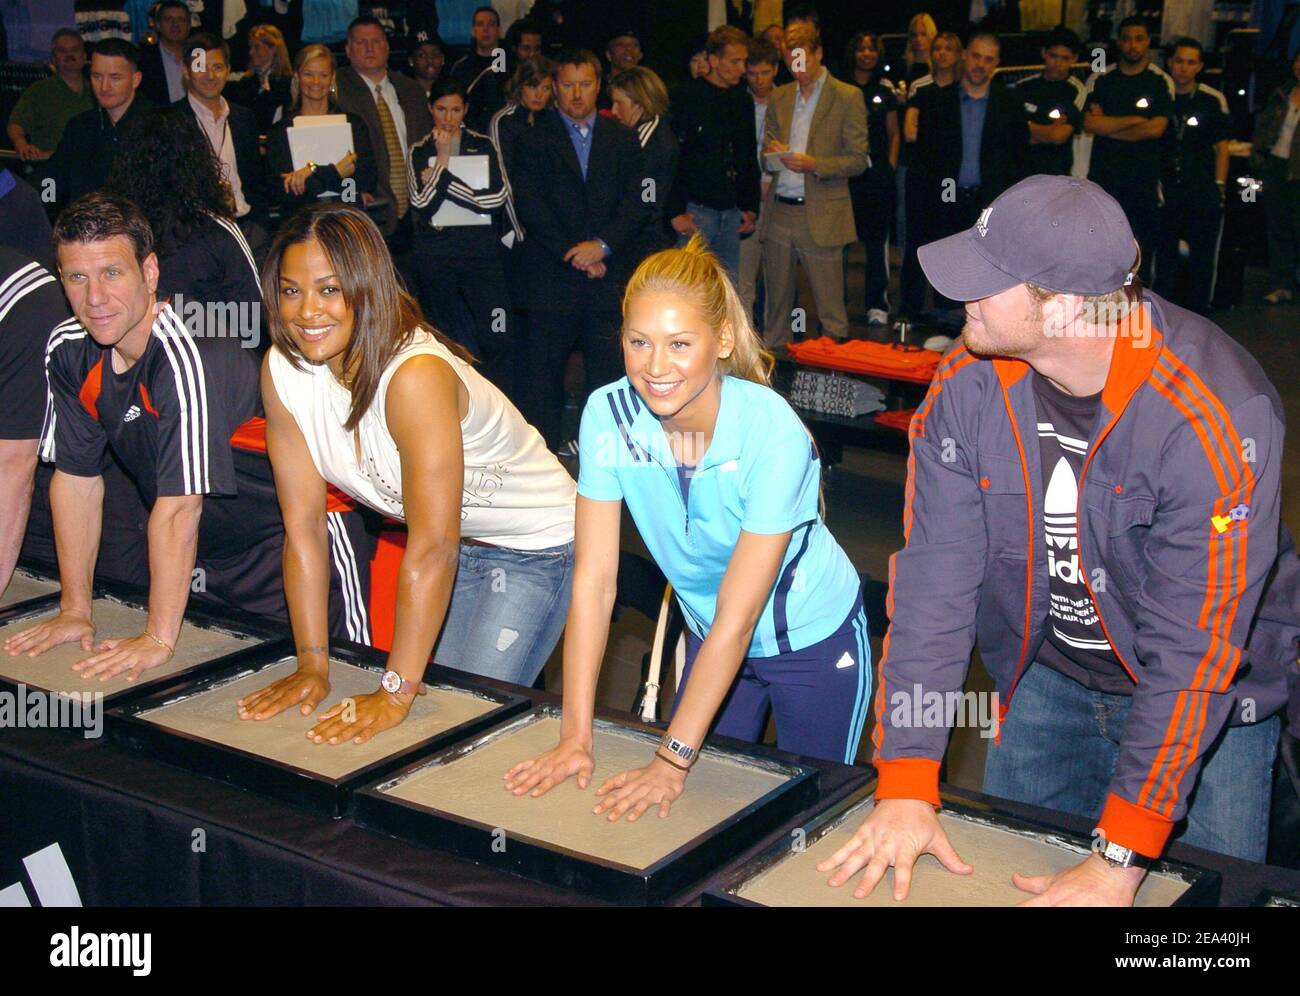 Soccer player Jeff Agoos, boxer Laila Ali, tennis player Anna Kournikova and NY Giants' Jeremy Shockey cast their handprints in cement during the Opening of the largest 'Adidas Sport Performance Store' in the World, at Downtown Manhattan in New York, USA, on May 7, 2005. Photo by Slaven Vlasic/CAMELEON/ABACA. Stock Photo